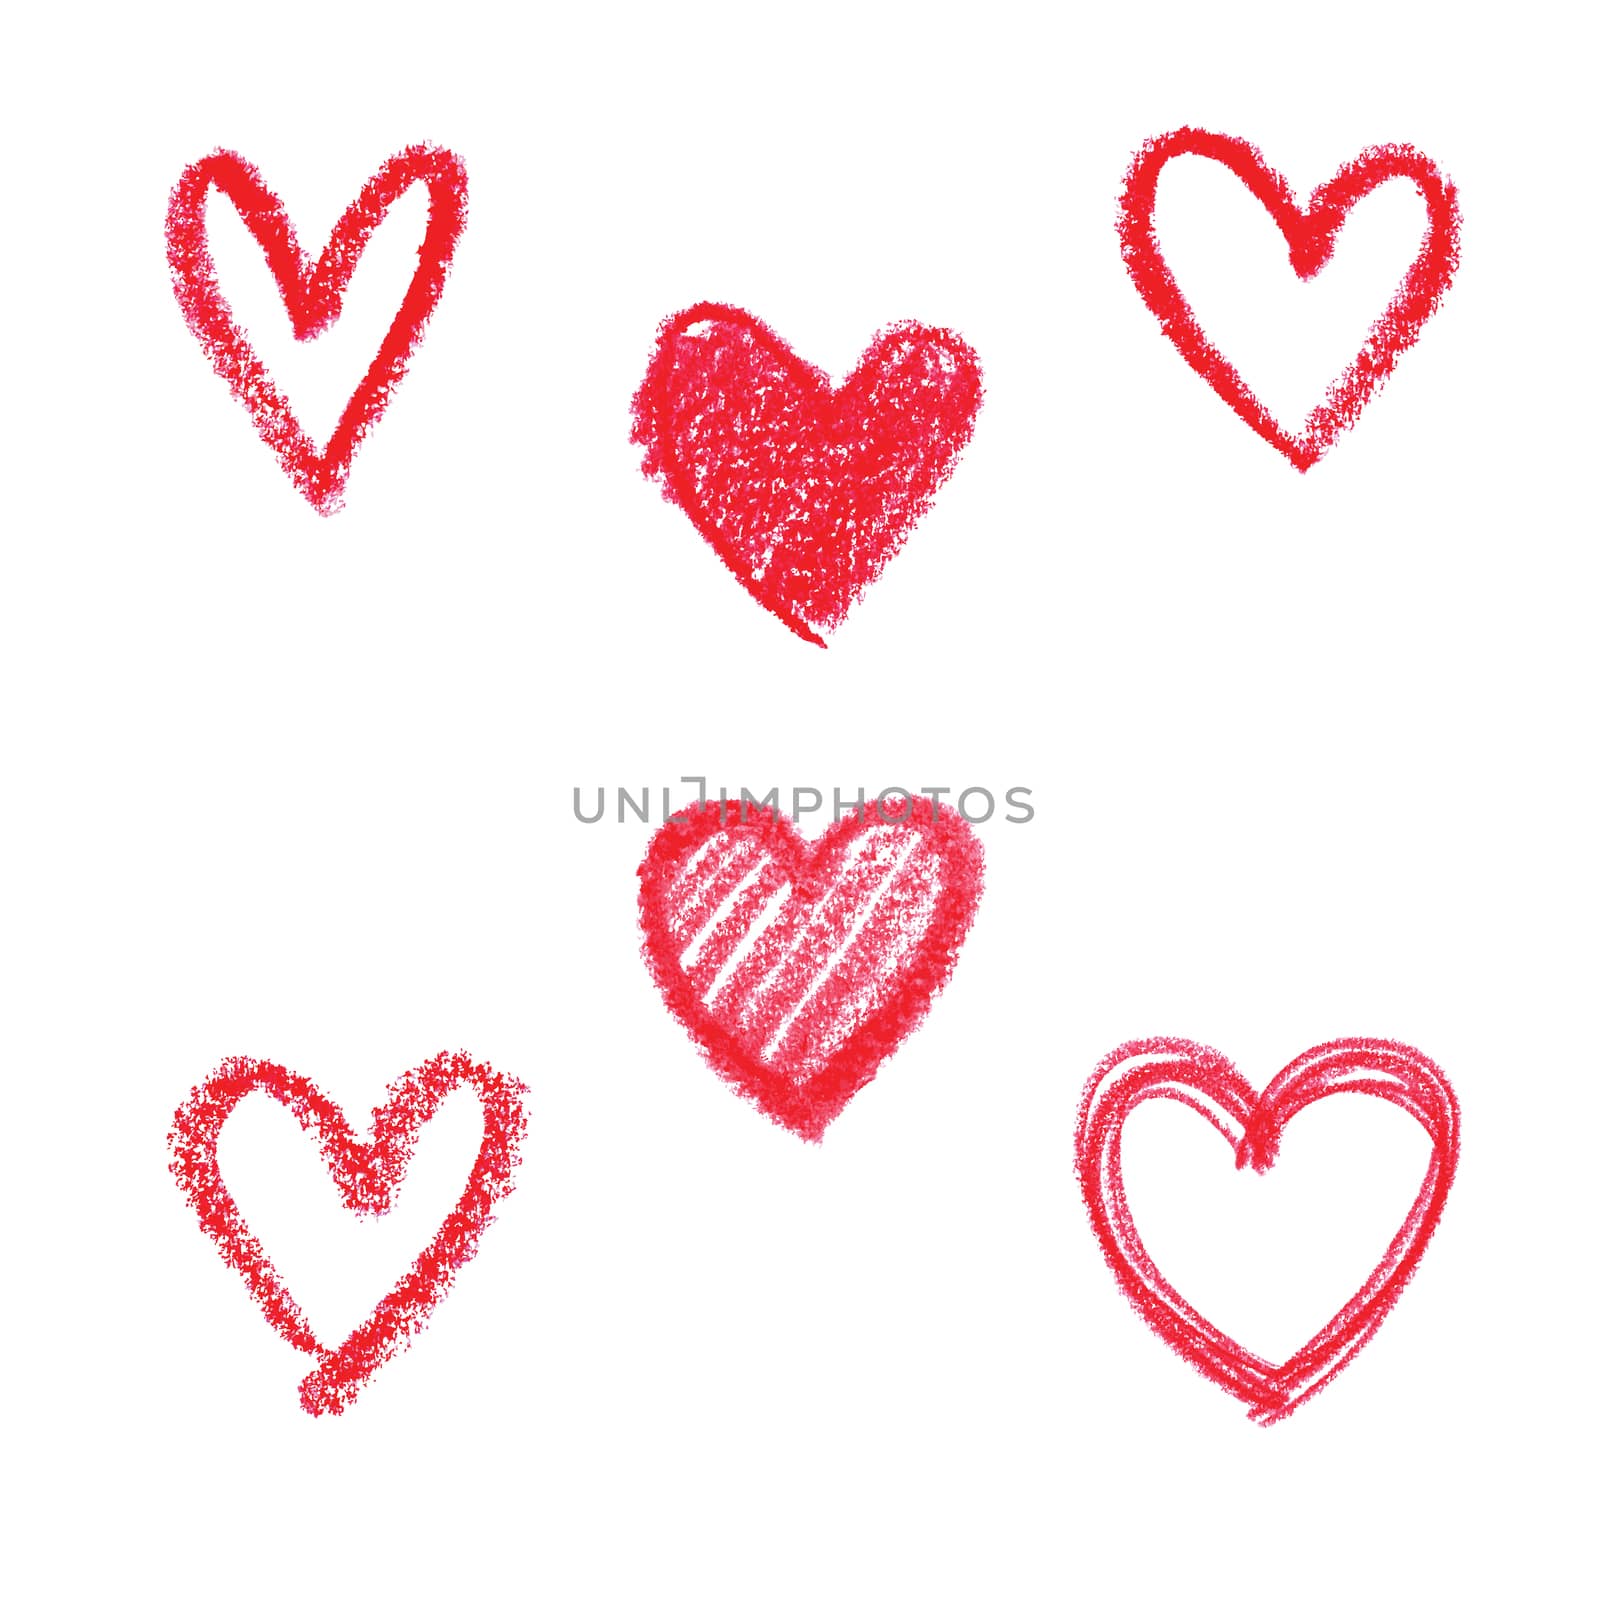 set of doodle abstract hand drawn pattern heart shaped on white background 